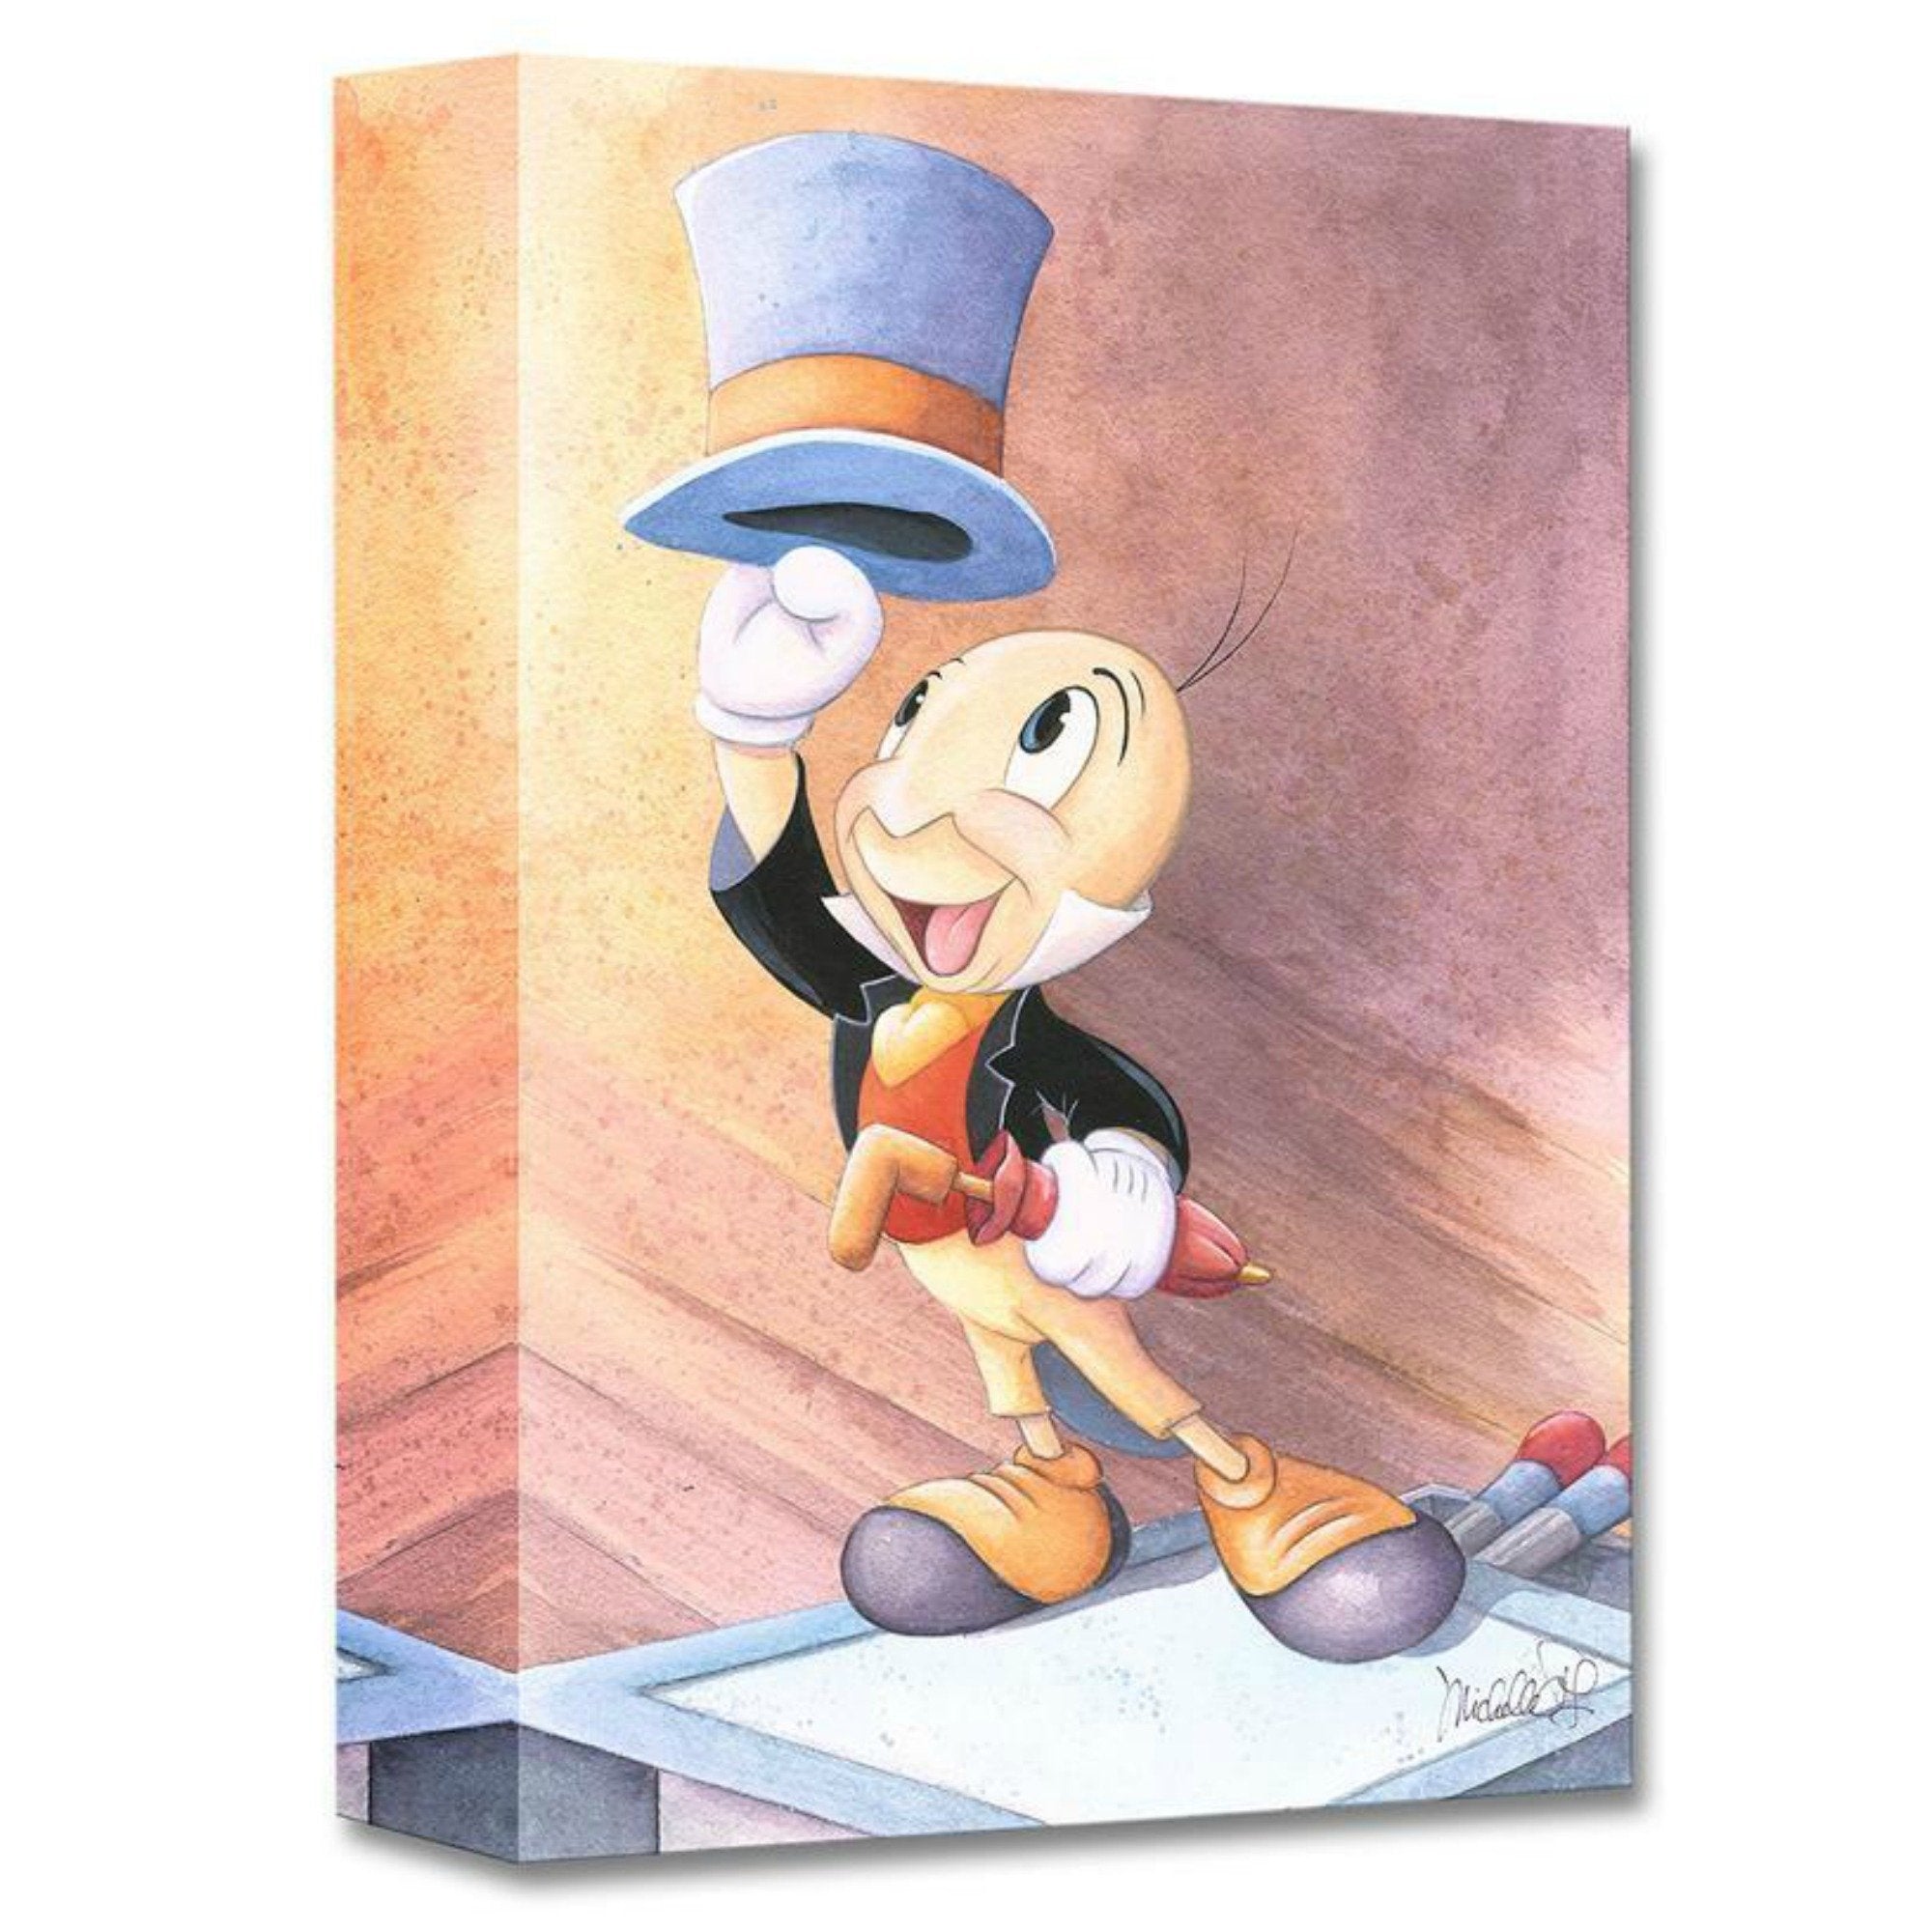 A Well Dressed Conscience by Michelle St. Laurent.   Sir Jiminy Cricket is ready to do his part top hat, jacket and umbrella in hand.